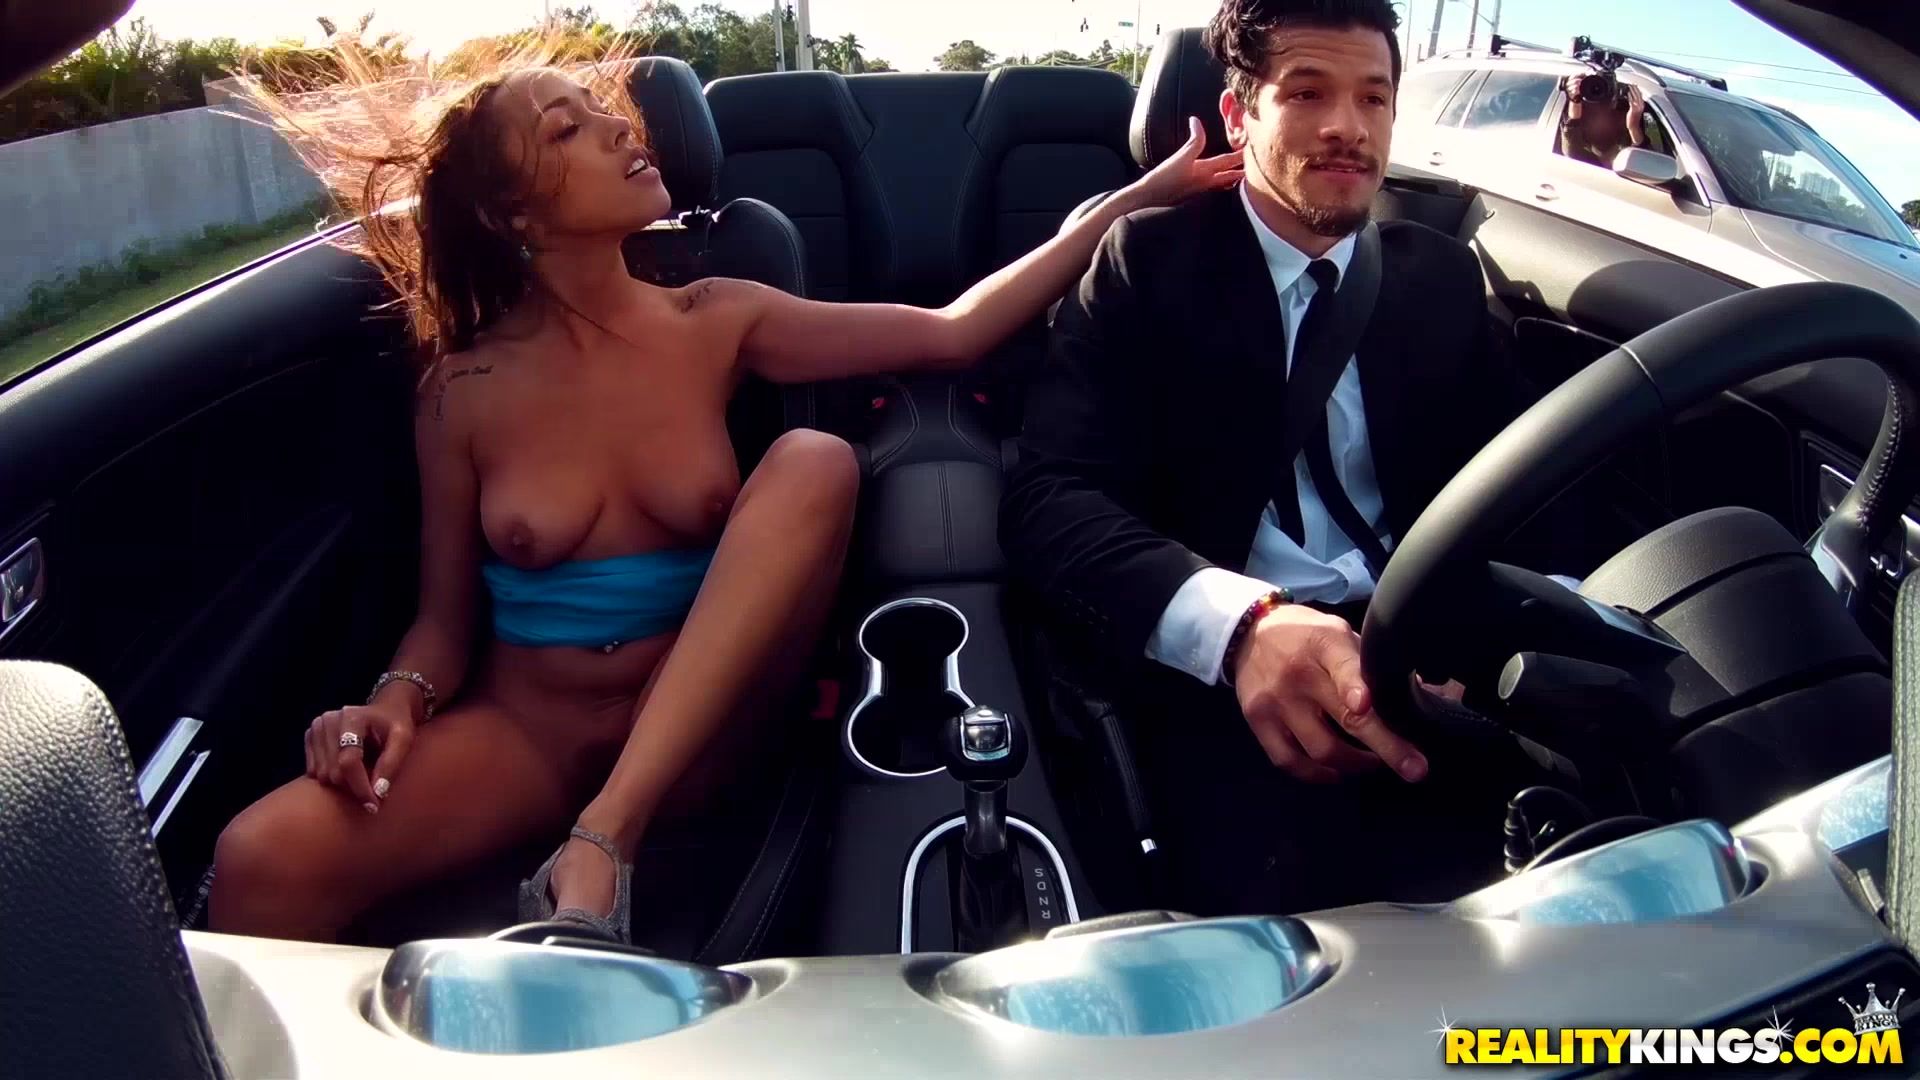 Piss Posh hottie gets her pussy ruined on a hood of a posh car TuKif